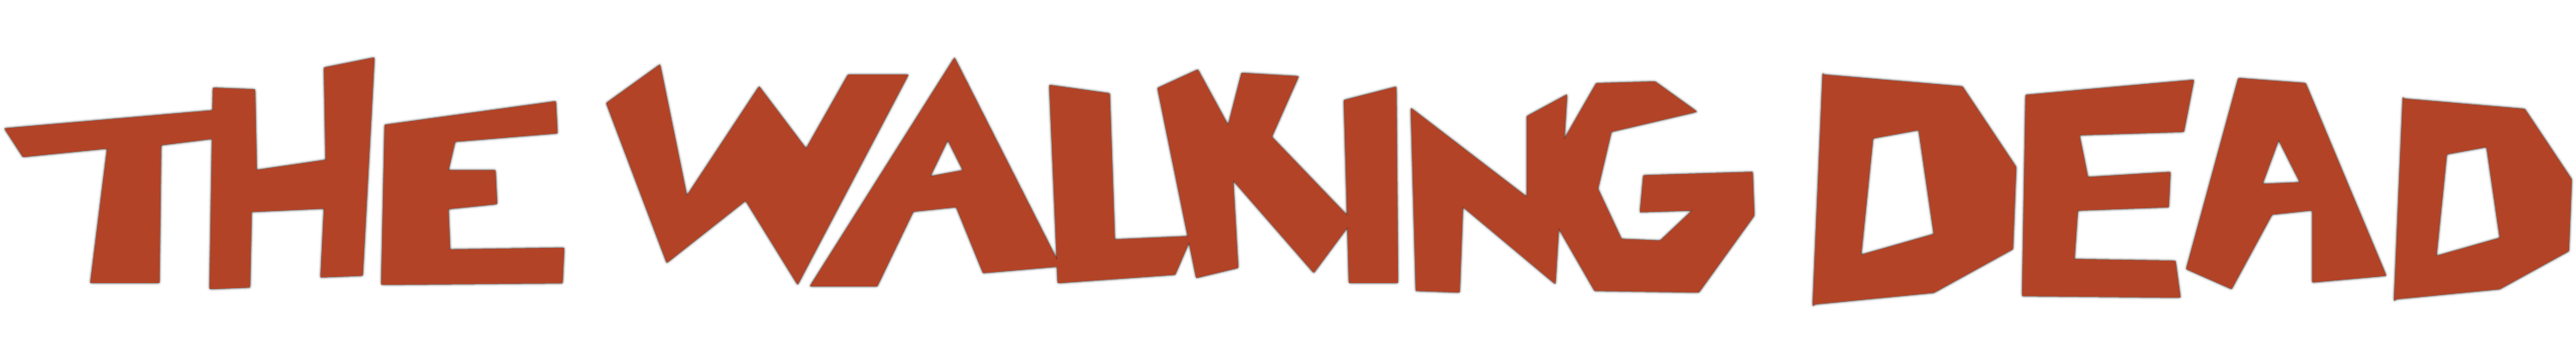 The Walking Dead Logo Png : Discover 27 free the walking dead logo png ...